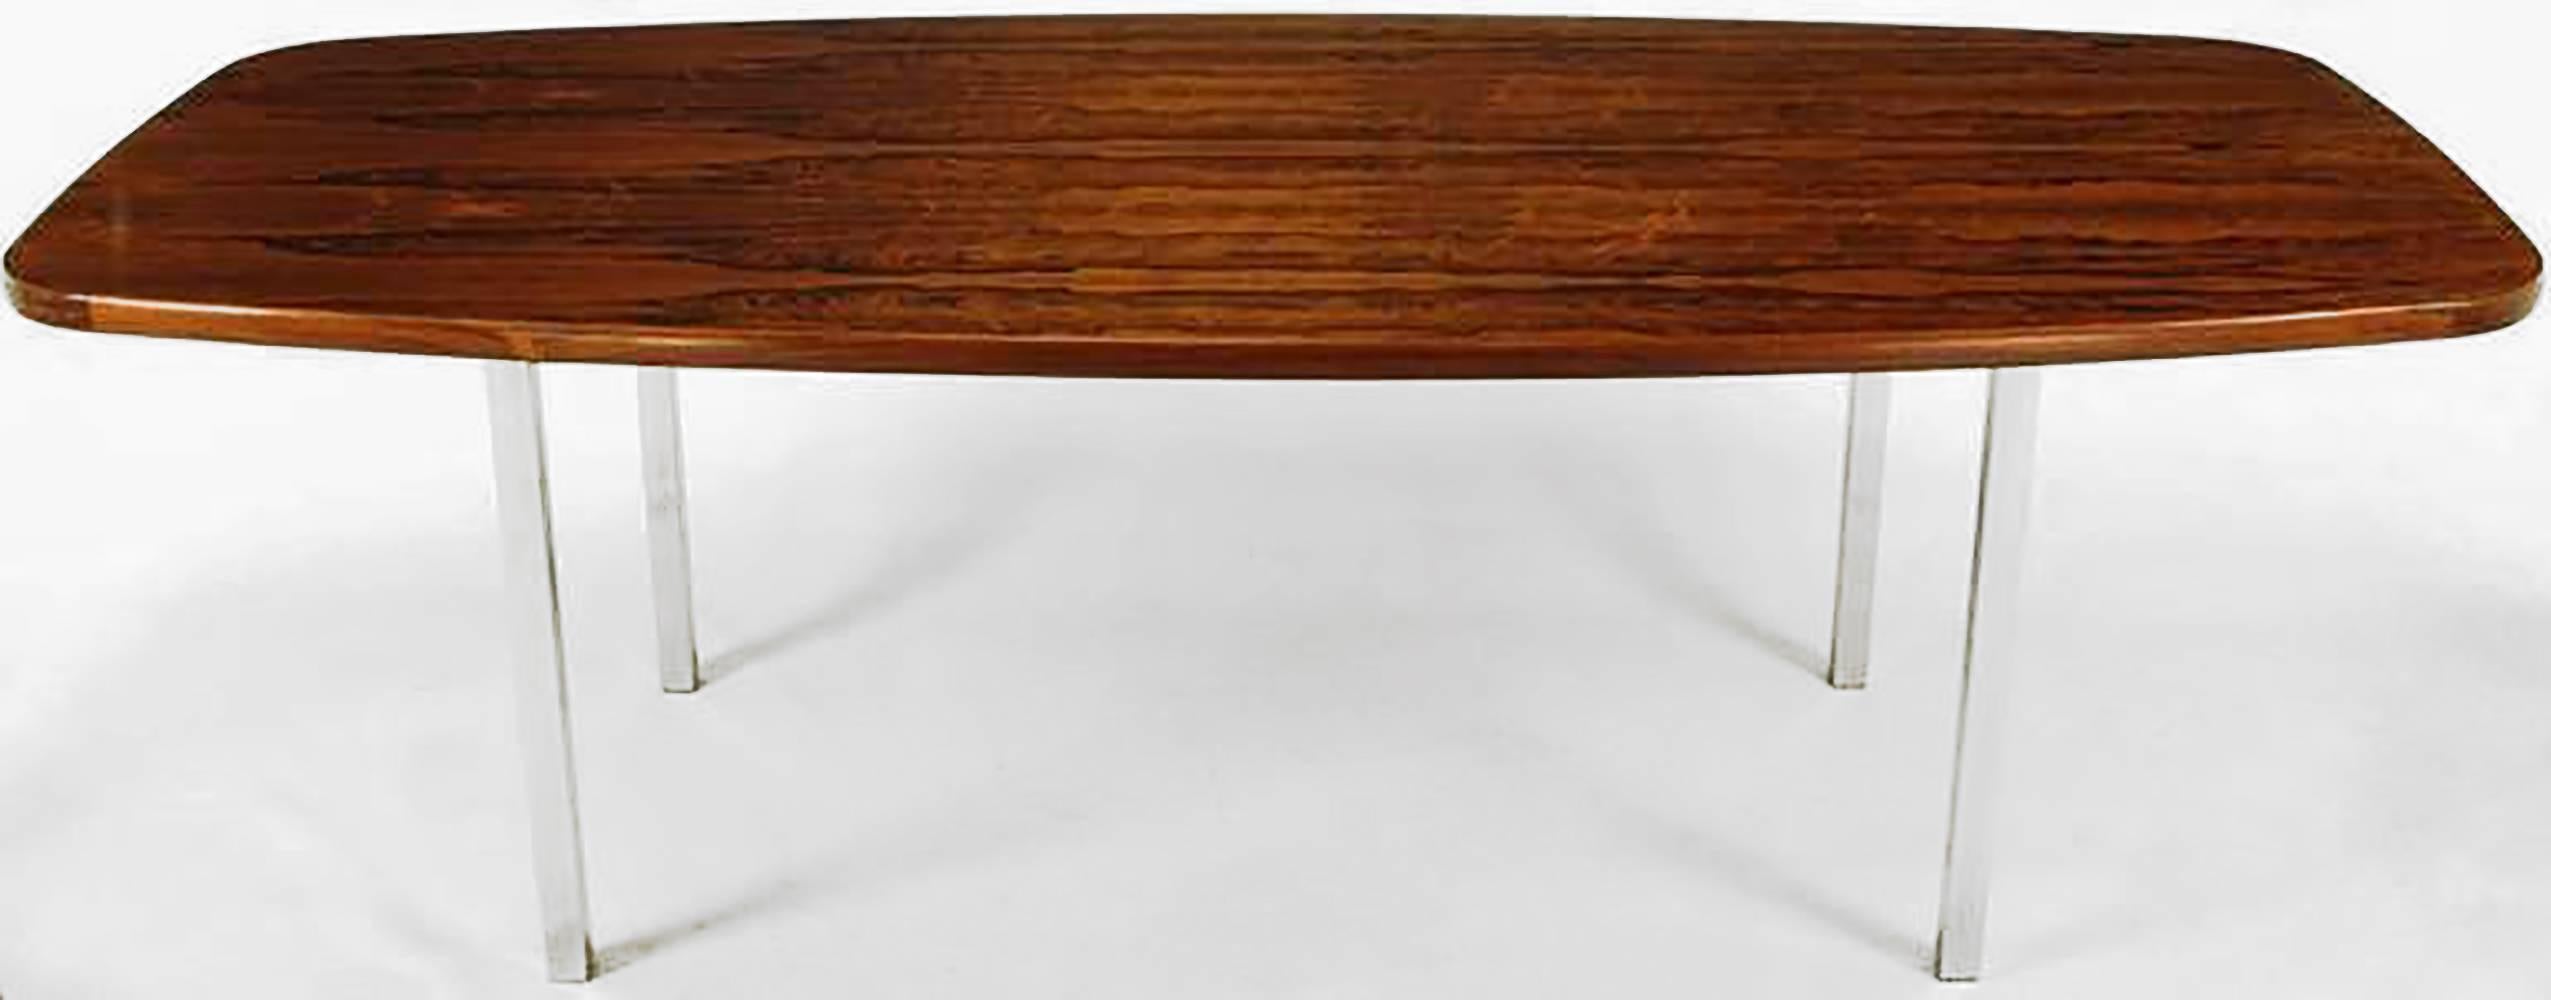 Dunbar rosewood dining table with polished stainless steel square bar legs. Would make an incredible large desk or small conference table as well. Has a custom cut-glass top to go over the wood if desired. Attributed to Roger Sprunger.